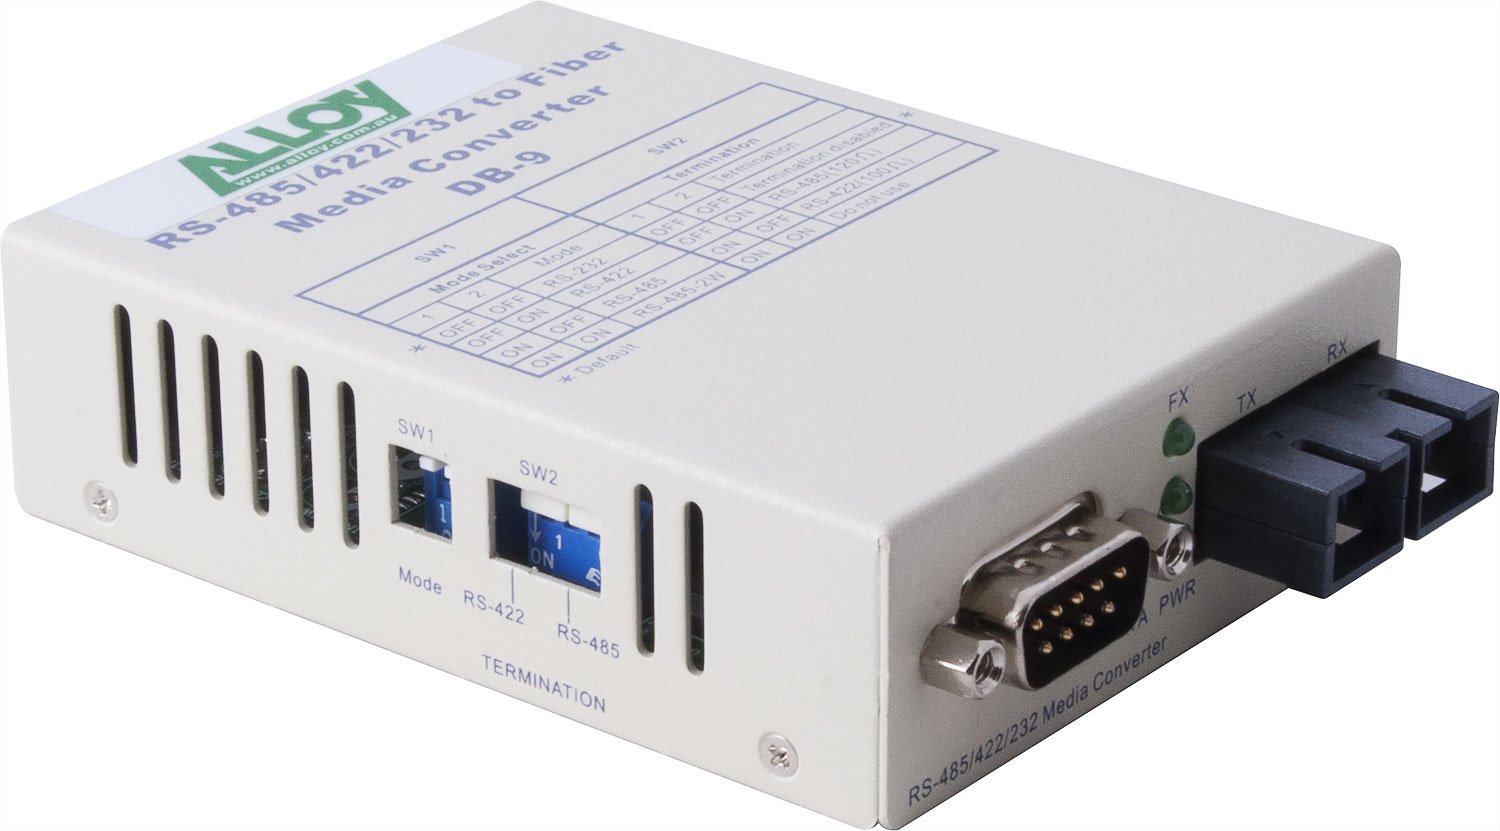 Alloy Serial To Fibre Standalone/Rack Converter RS-232/422/485 DB-9 To Multimode SC, 2Km